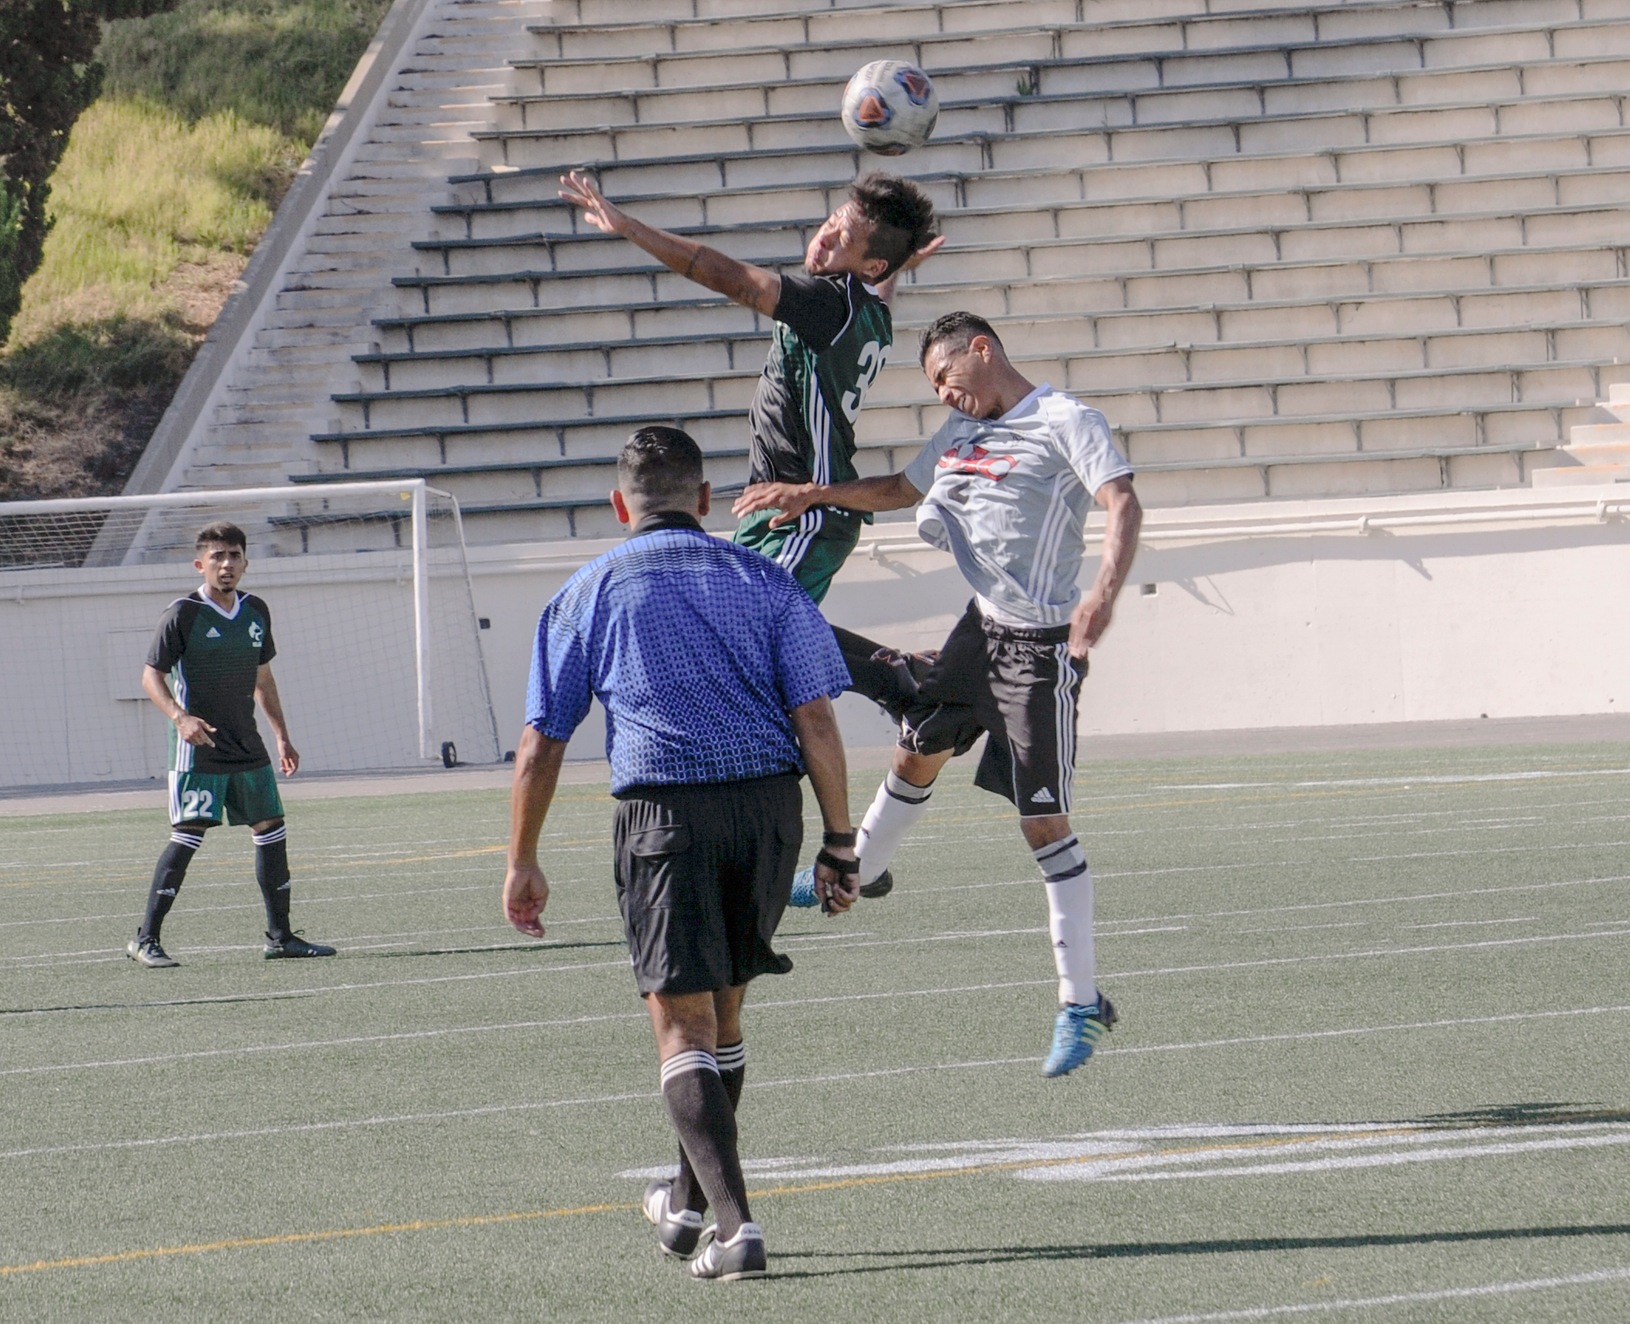 Freshman Paulo Macedo Nahasique of the East L.A. College men's soccer team is mid-air during a game earlier this season. (Photo by Tadzio Garcia)